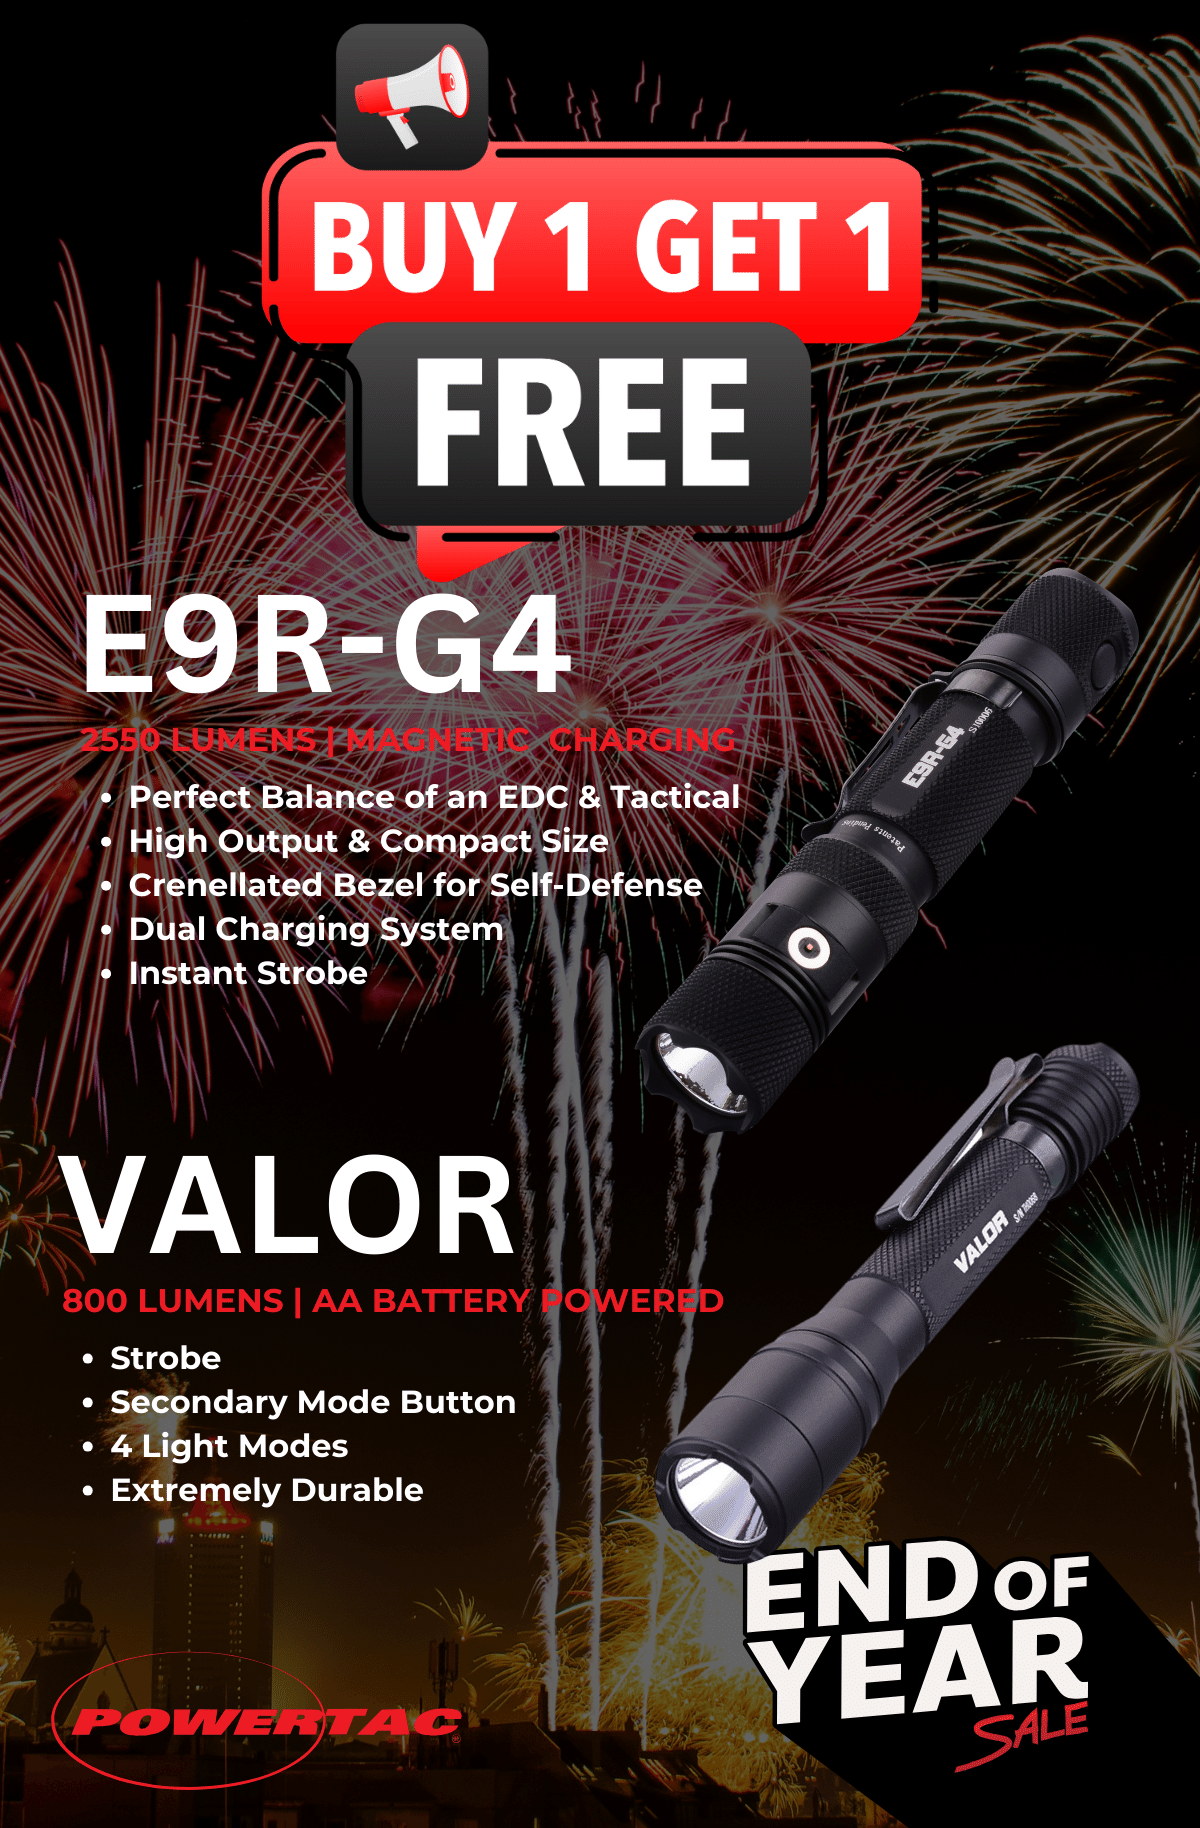 Buy The E9R-G4 And Get The Valor For Free. Use Code: NewYear24 At Checkout